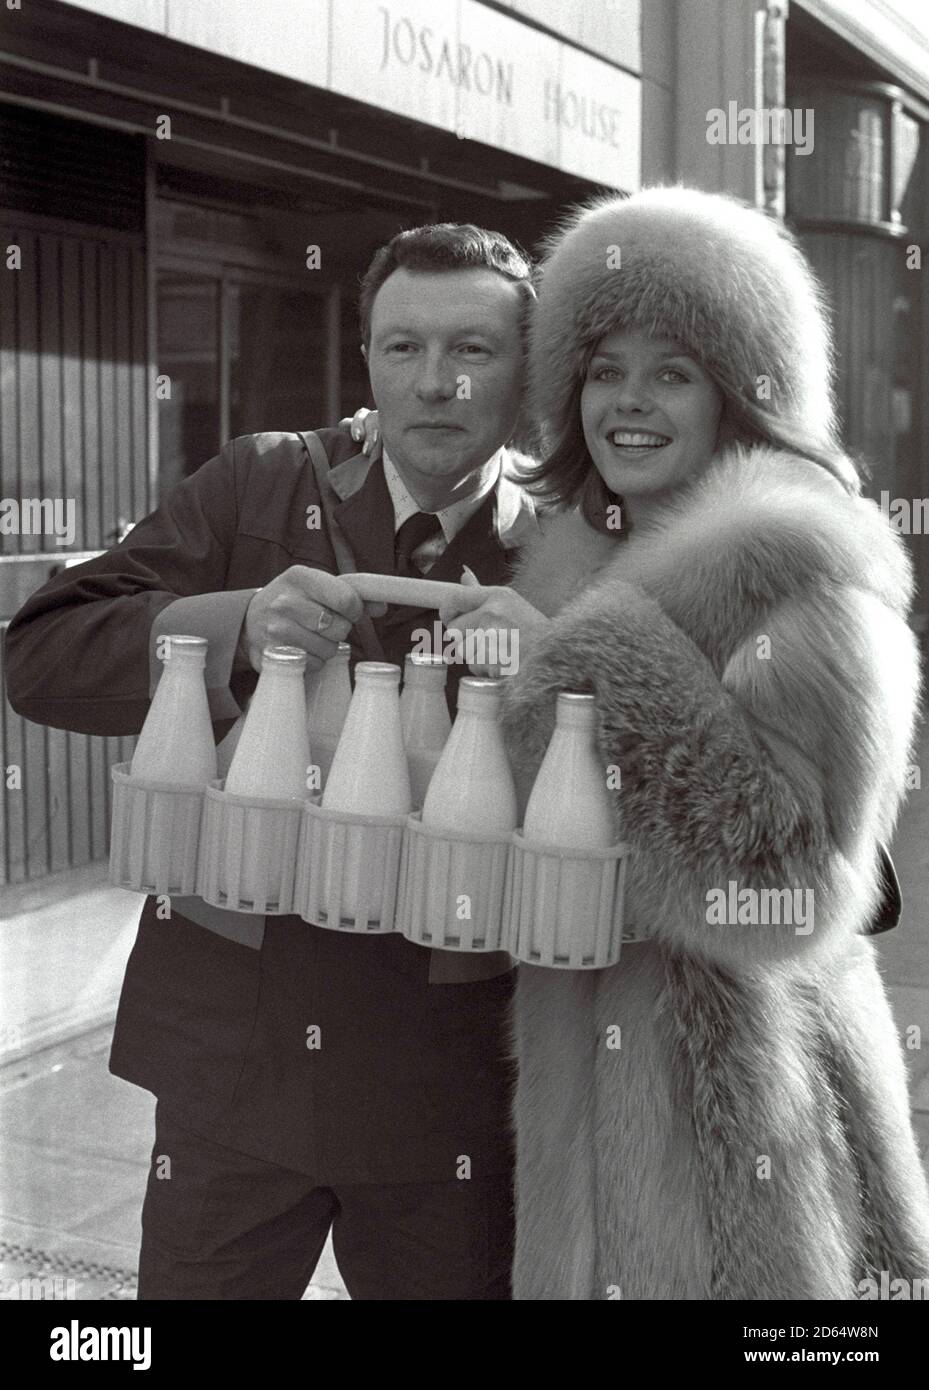 At the National Dairy Centre Peter Lucas, 43, of Dorking, who is employed by Unigate Ltd, is pictured at their Westcott Depot, meets Susan Cuff, Miss Great Britain. Susan was on hand to present him with the prize of Â£500 for winning the title 'Personality Milkman for 1976'. Stock Photo